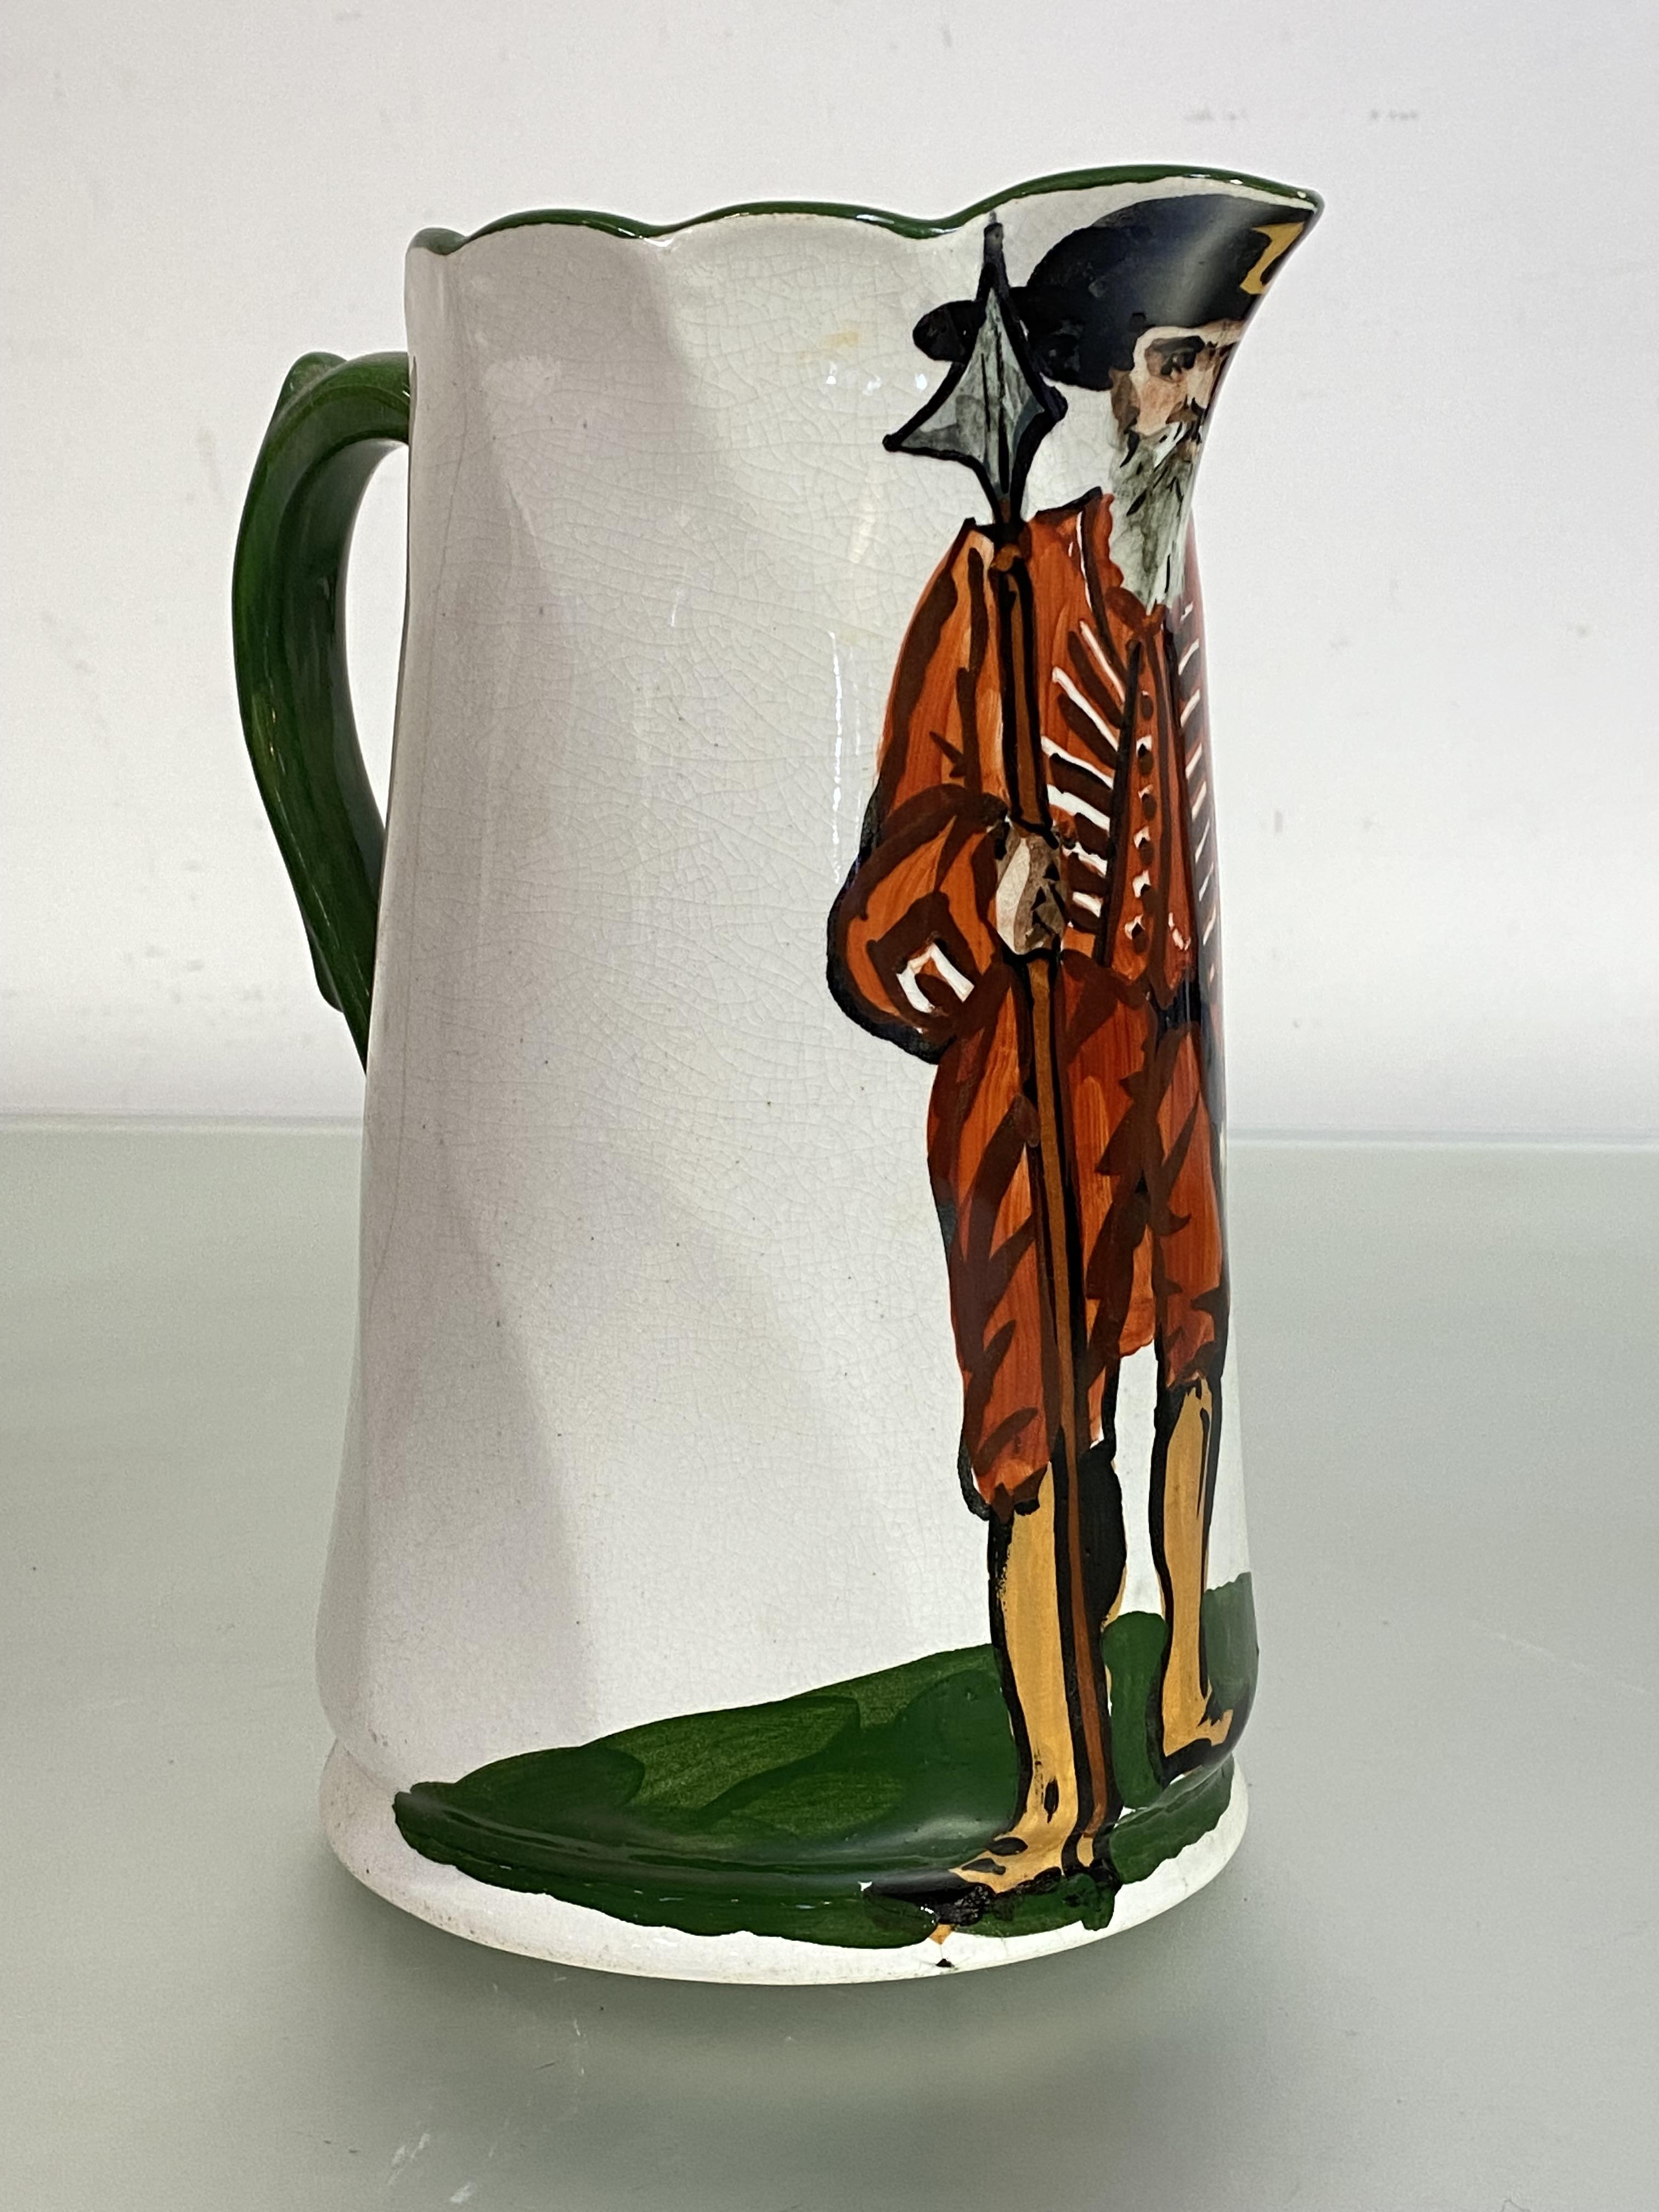 A Wemyss pottery "Town Beadle of Perth" jug, early 20th century, painted with an image of the Beadle